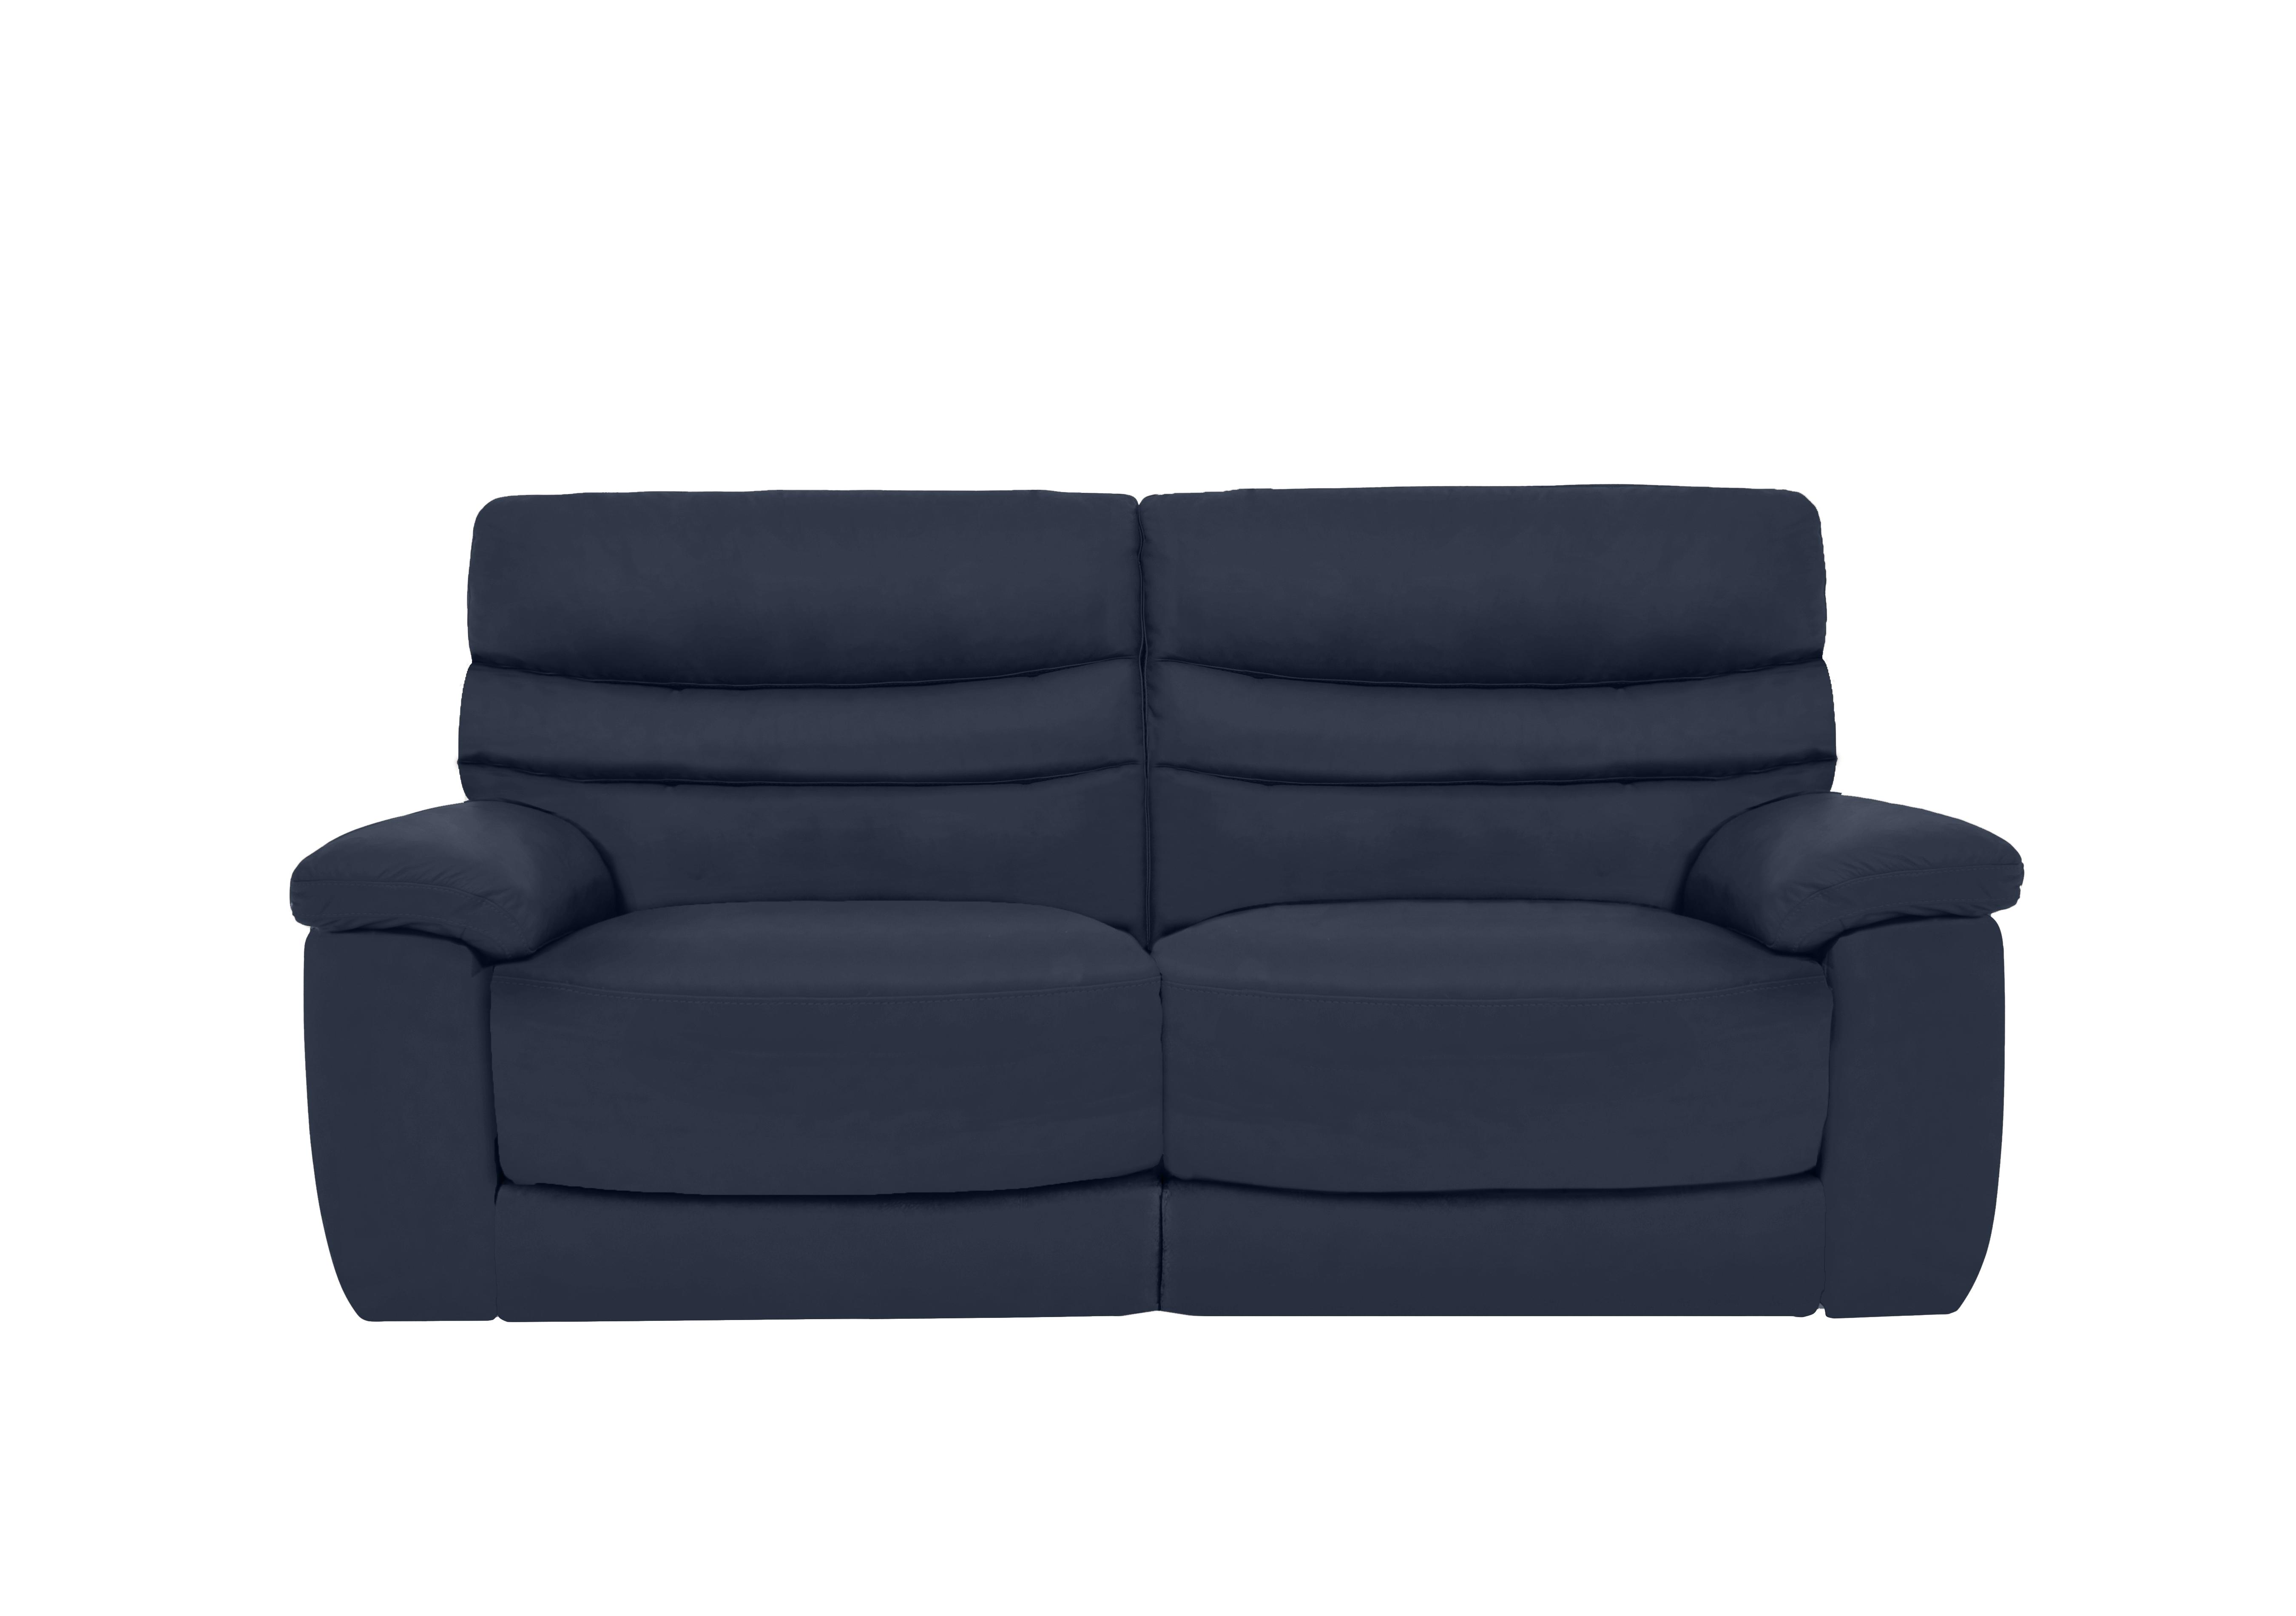 Nimbus 3 Seater Leather Power Recliner Sofa with Power Headrests and Power Lumbar in Bx-036c Navy on Furniture Village